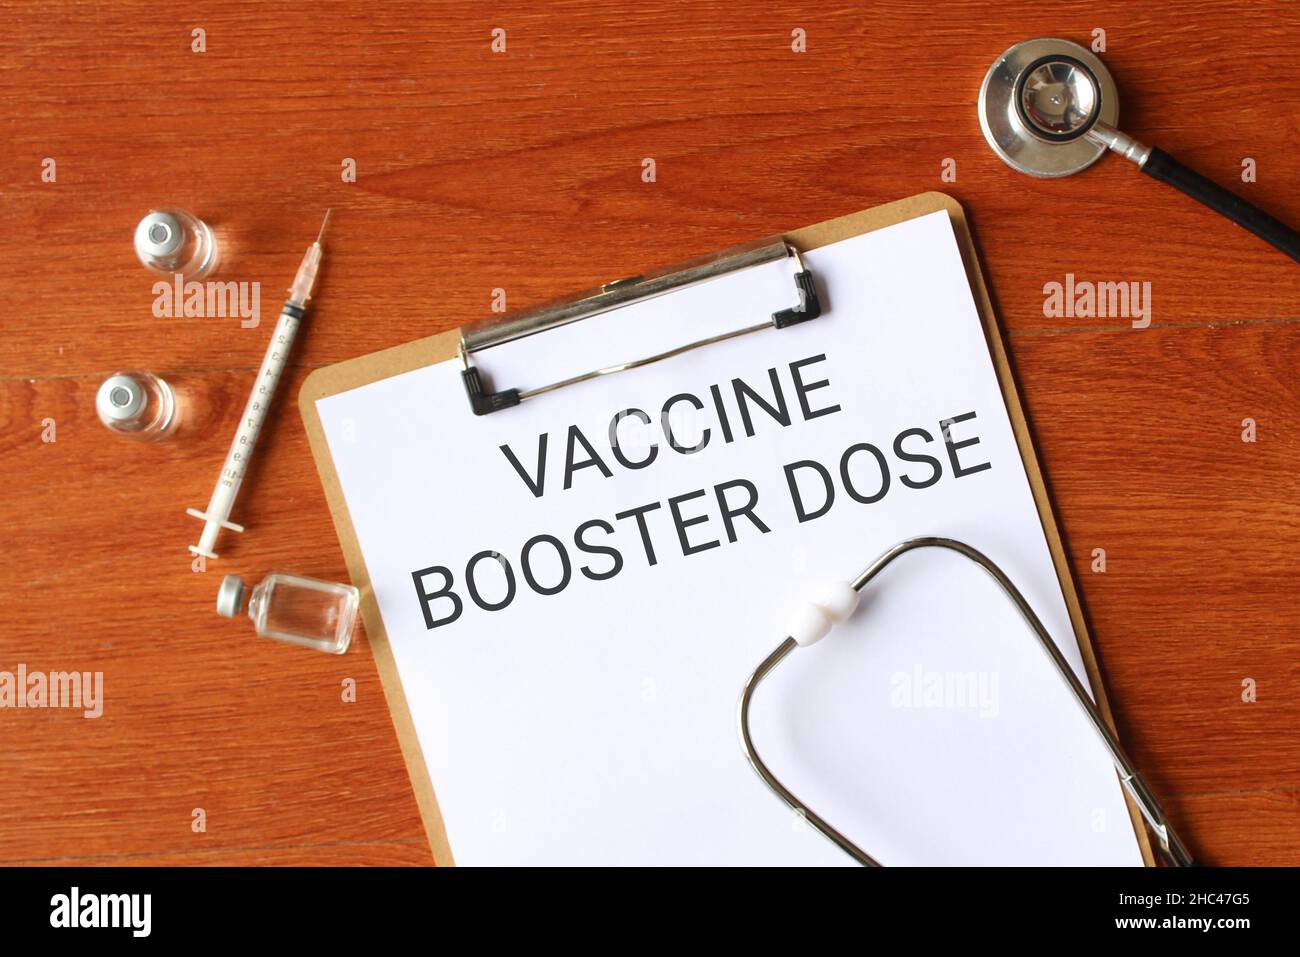 Top view of stethoscope, 3 bottle glass vial, syringe and paper clipboard with text VACCINE BOOSTER DOSE Stock Photo